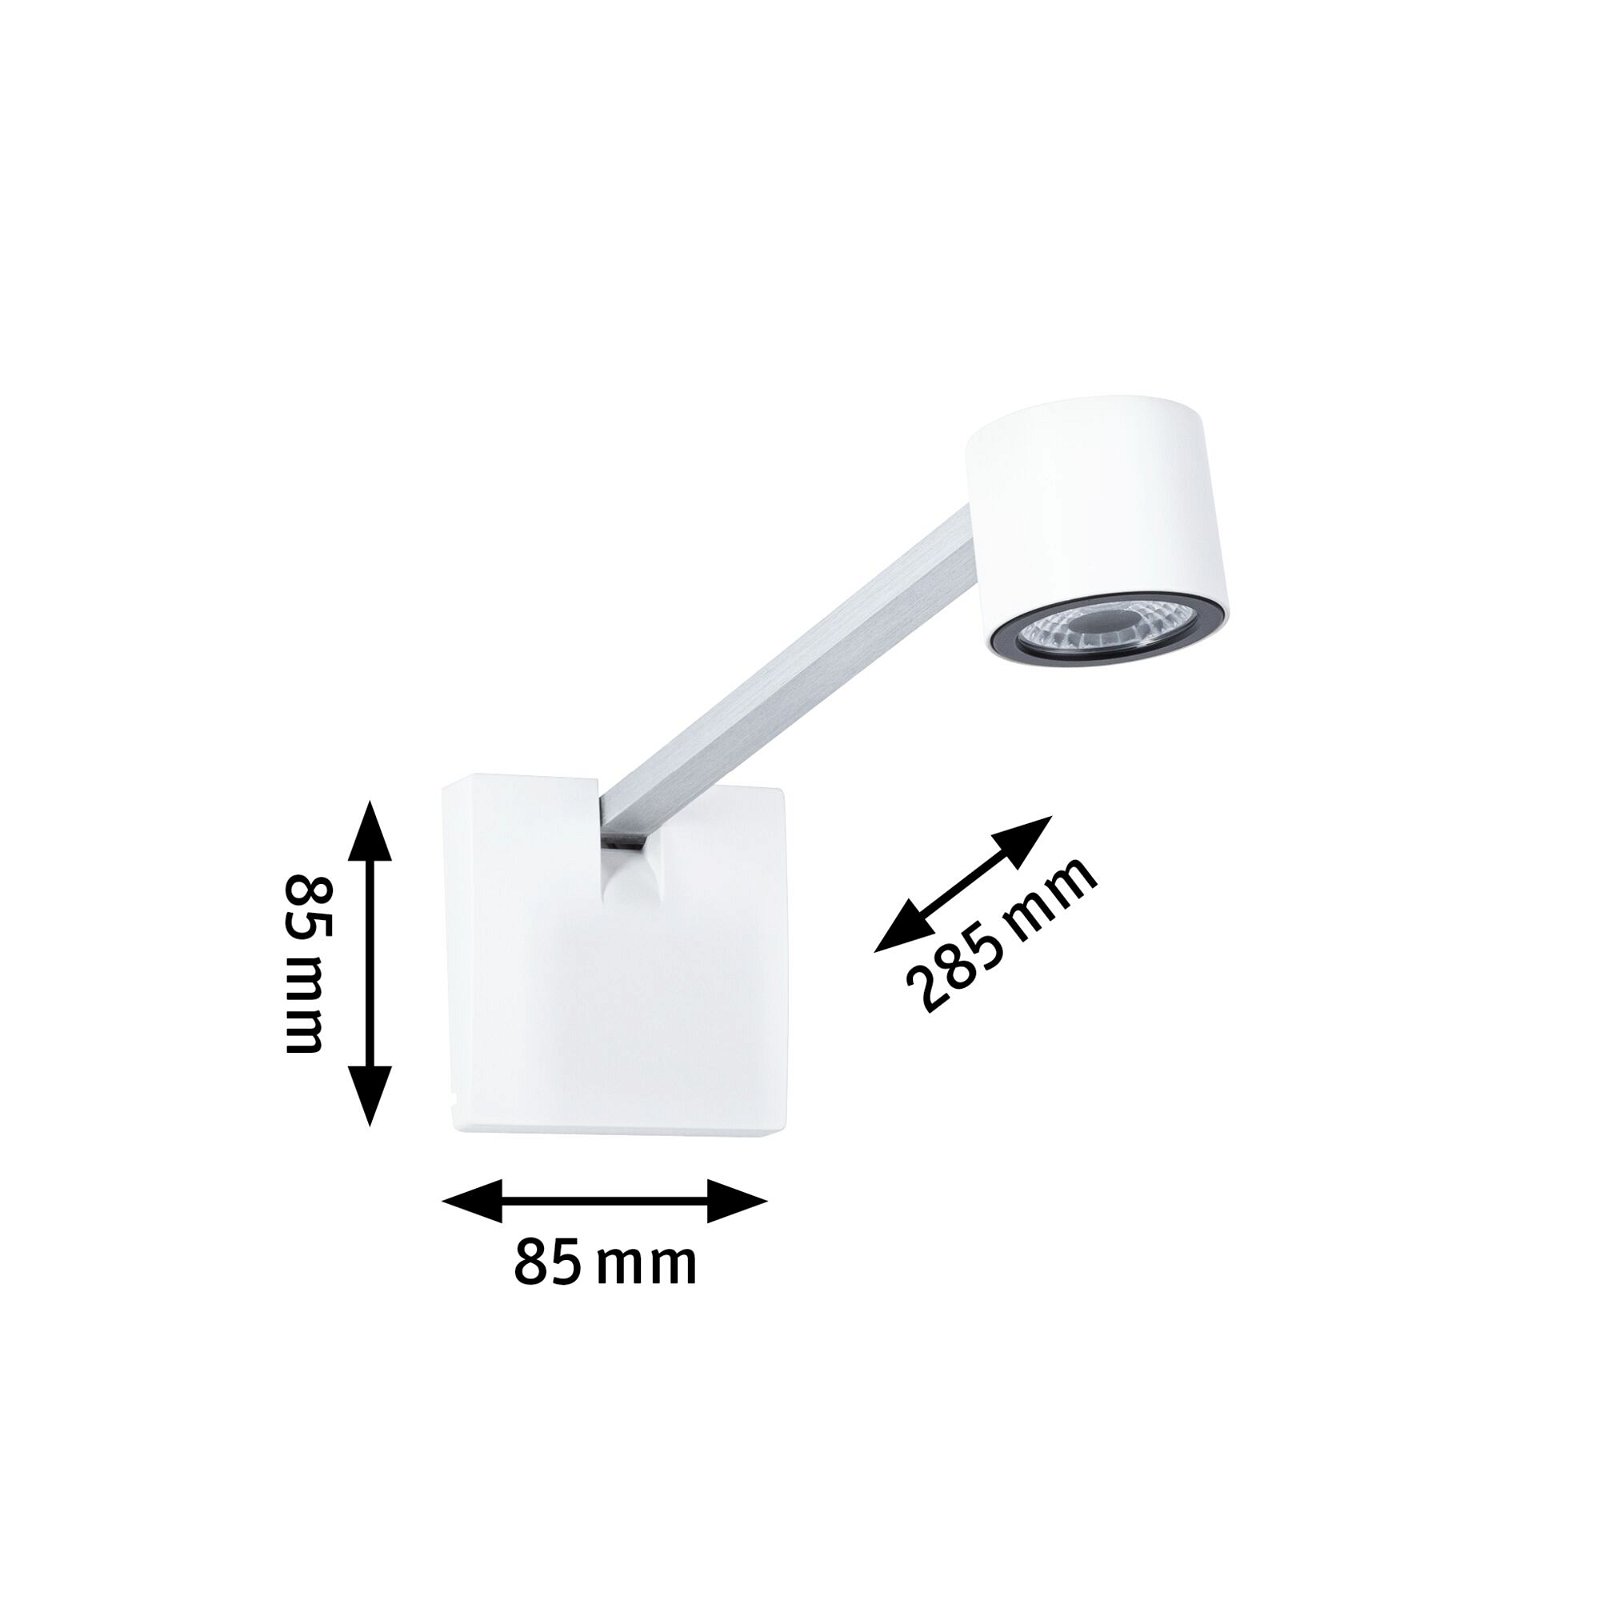 LED Picture luminaire Adelia 2700K 370lm 24V 4,5W dimmable Brushed aluminium